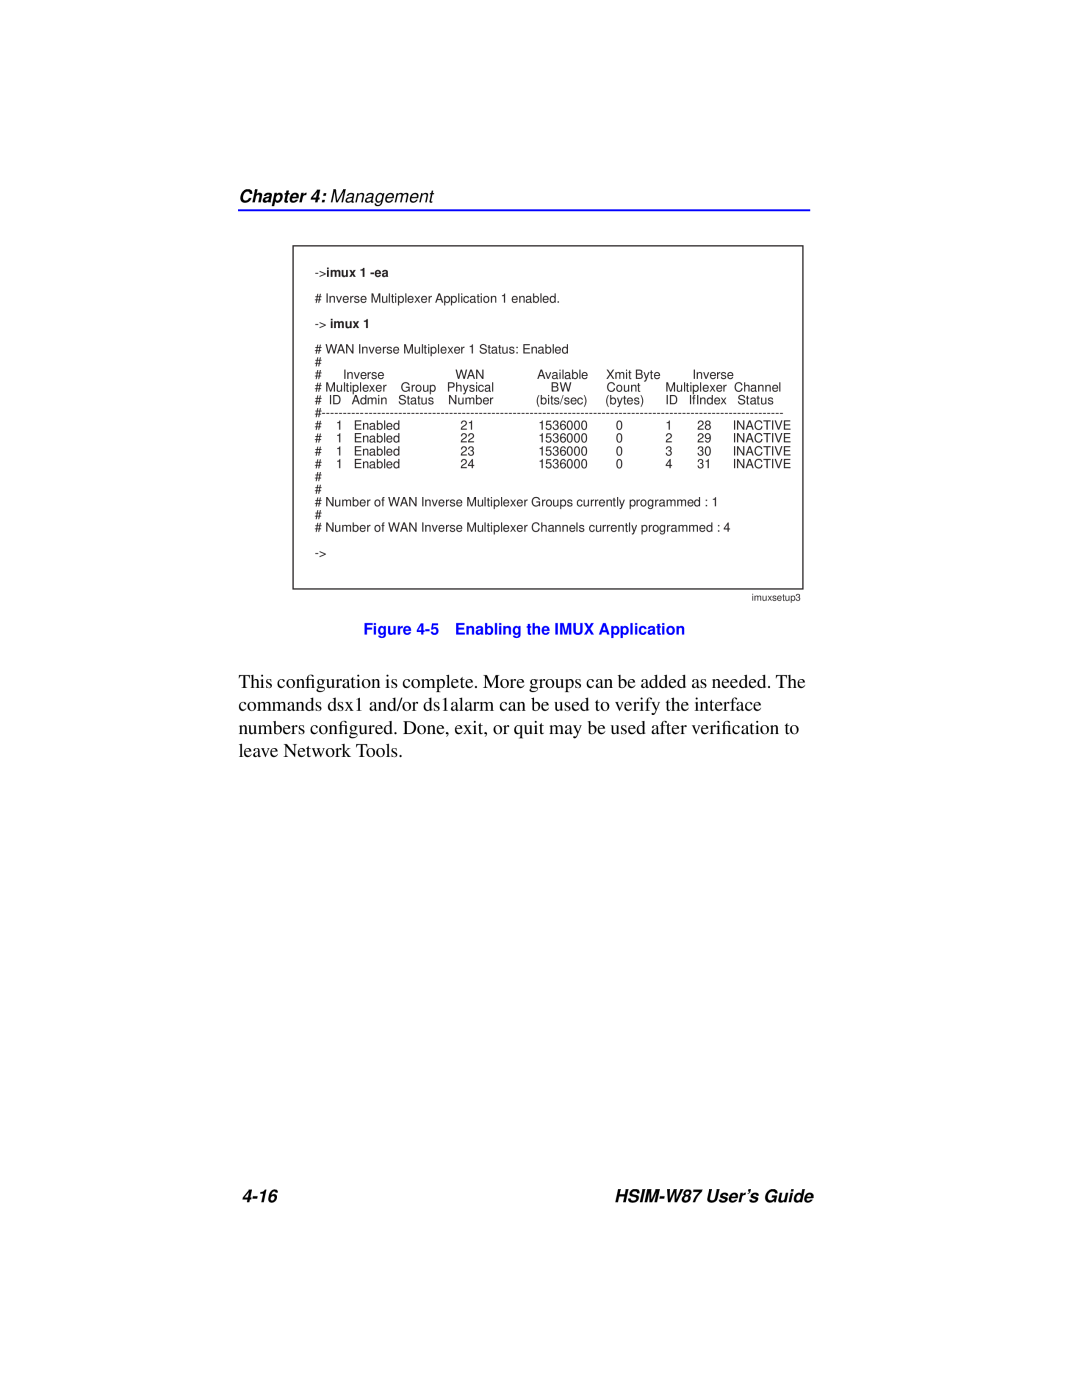 Cabletron Systems manual Management, 4-16, HSIM-W87 User’s Guide, 5 Enabling the IMUX Application, imux 1 -ea 